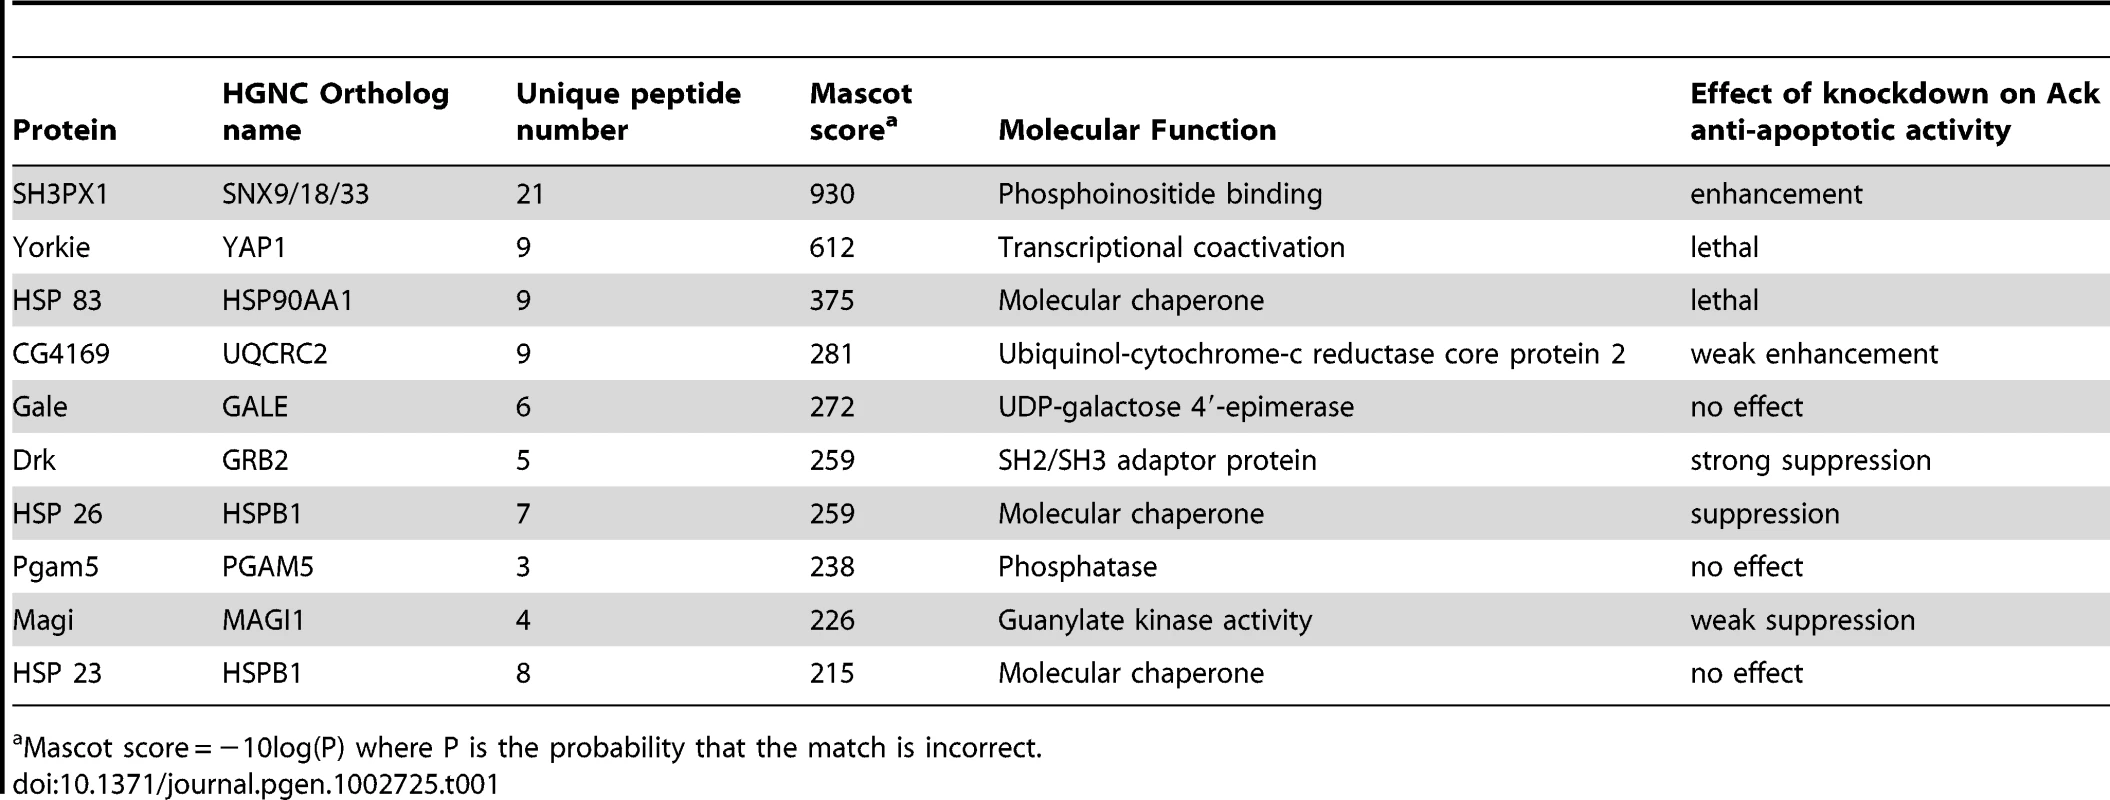 Top ten Ack interacting proteins based on their Mascot score.